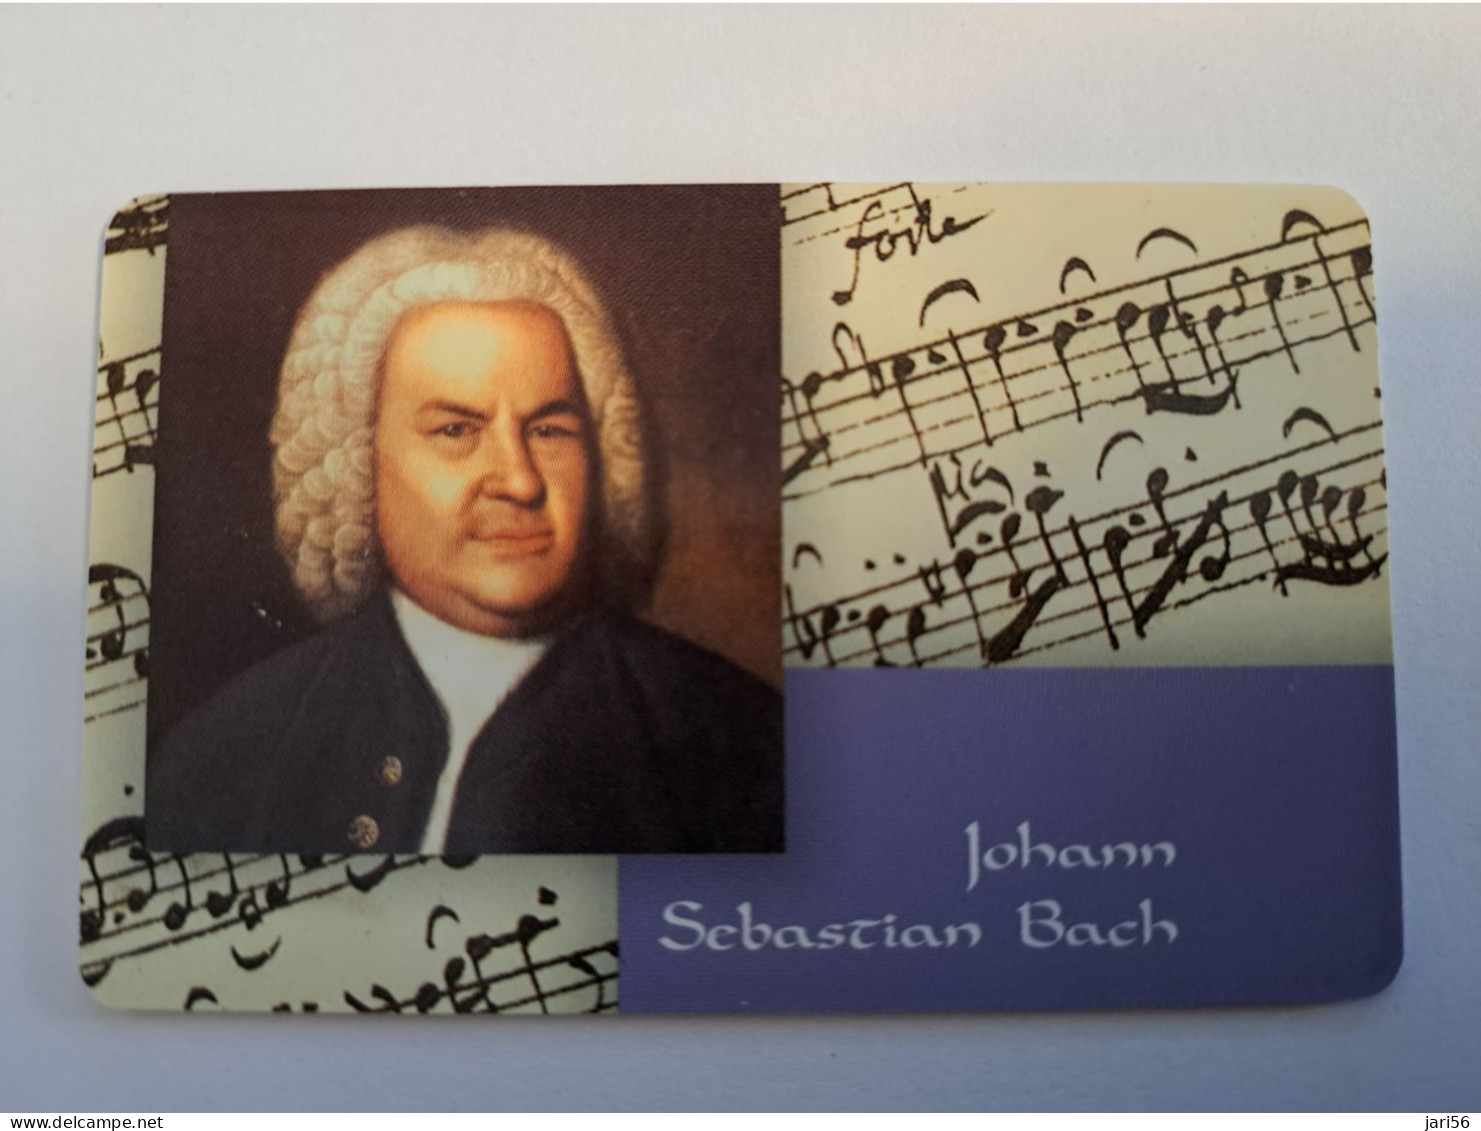 DUITSLAND/ GERMANY  SERIE 5X CHIPCARD  COMPONISTEN / WAGNER/BEETHOVEN/VERDI/MOZART/BACH /  USED    **16176** - K-Serie : Serie Clienti